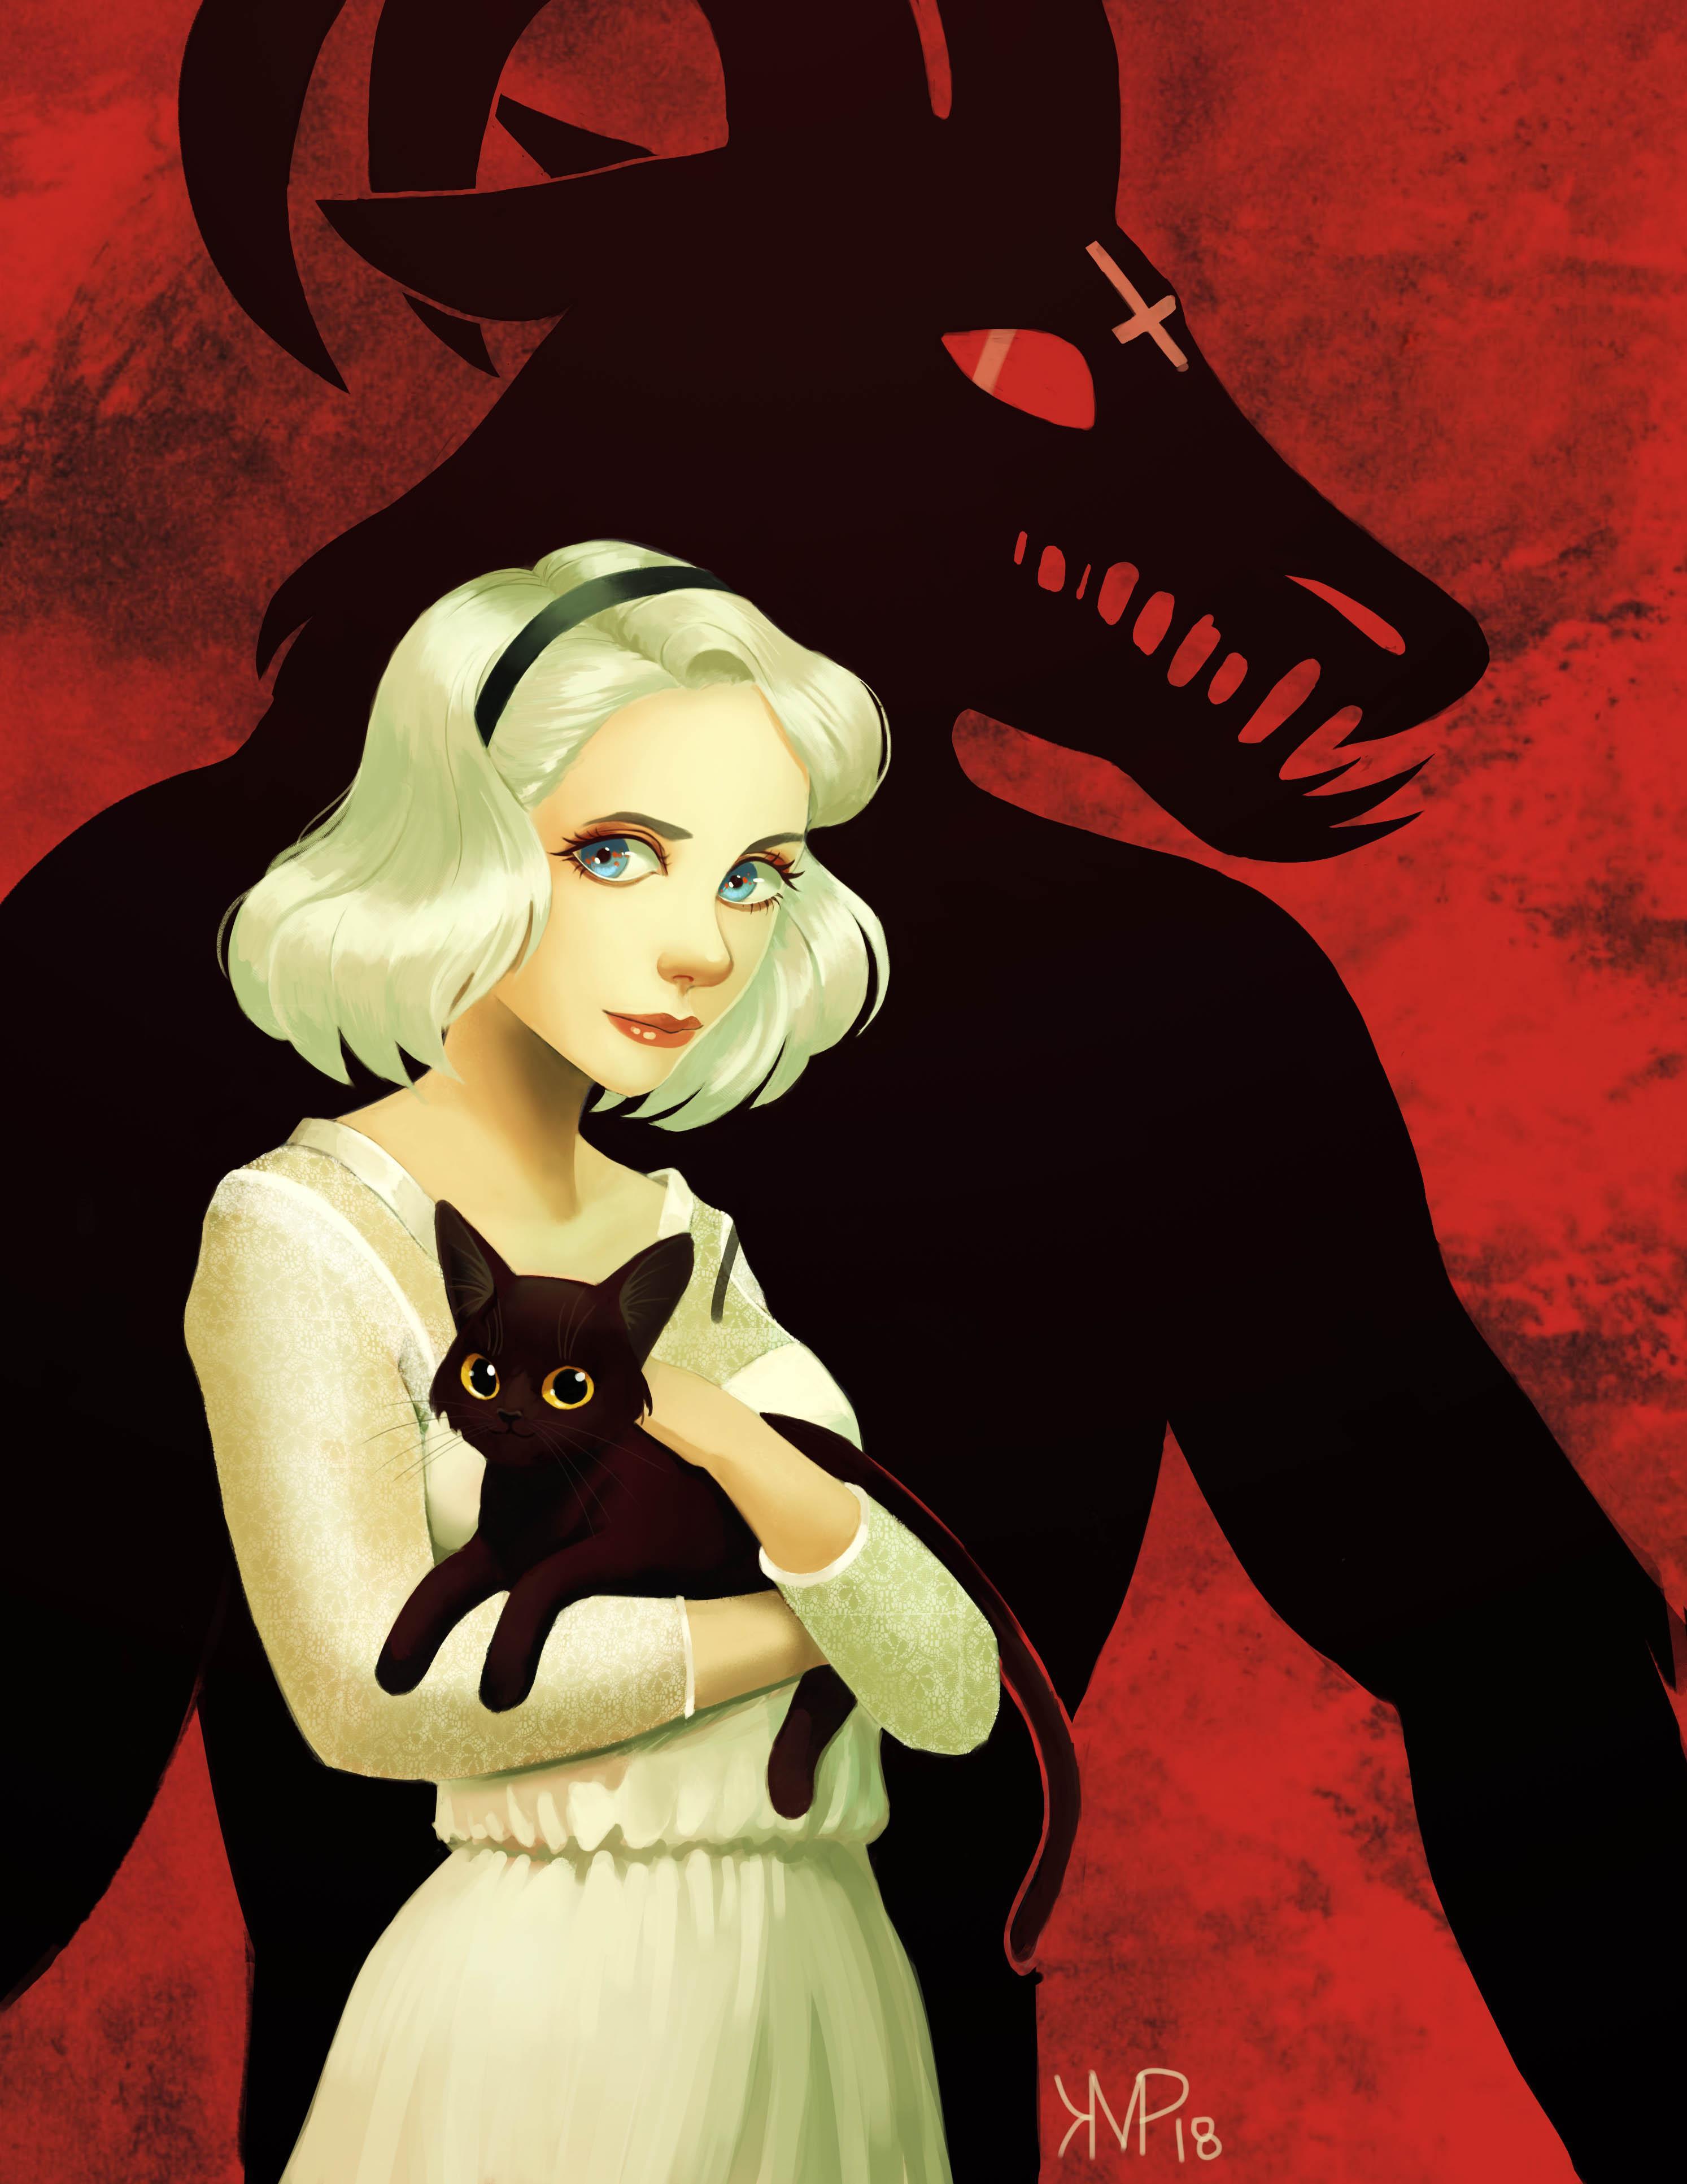 Fan Art of The Chilling Adventures of Sabrina